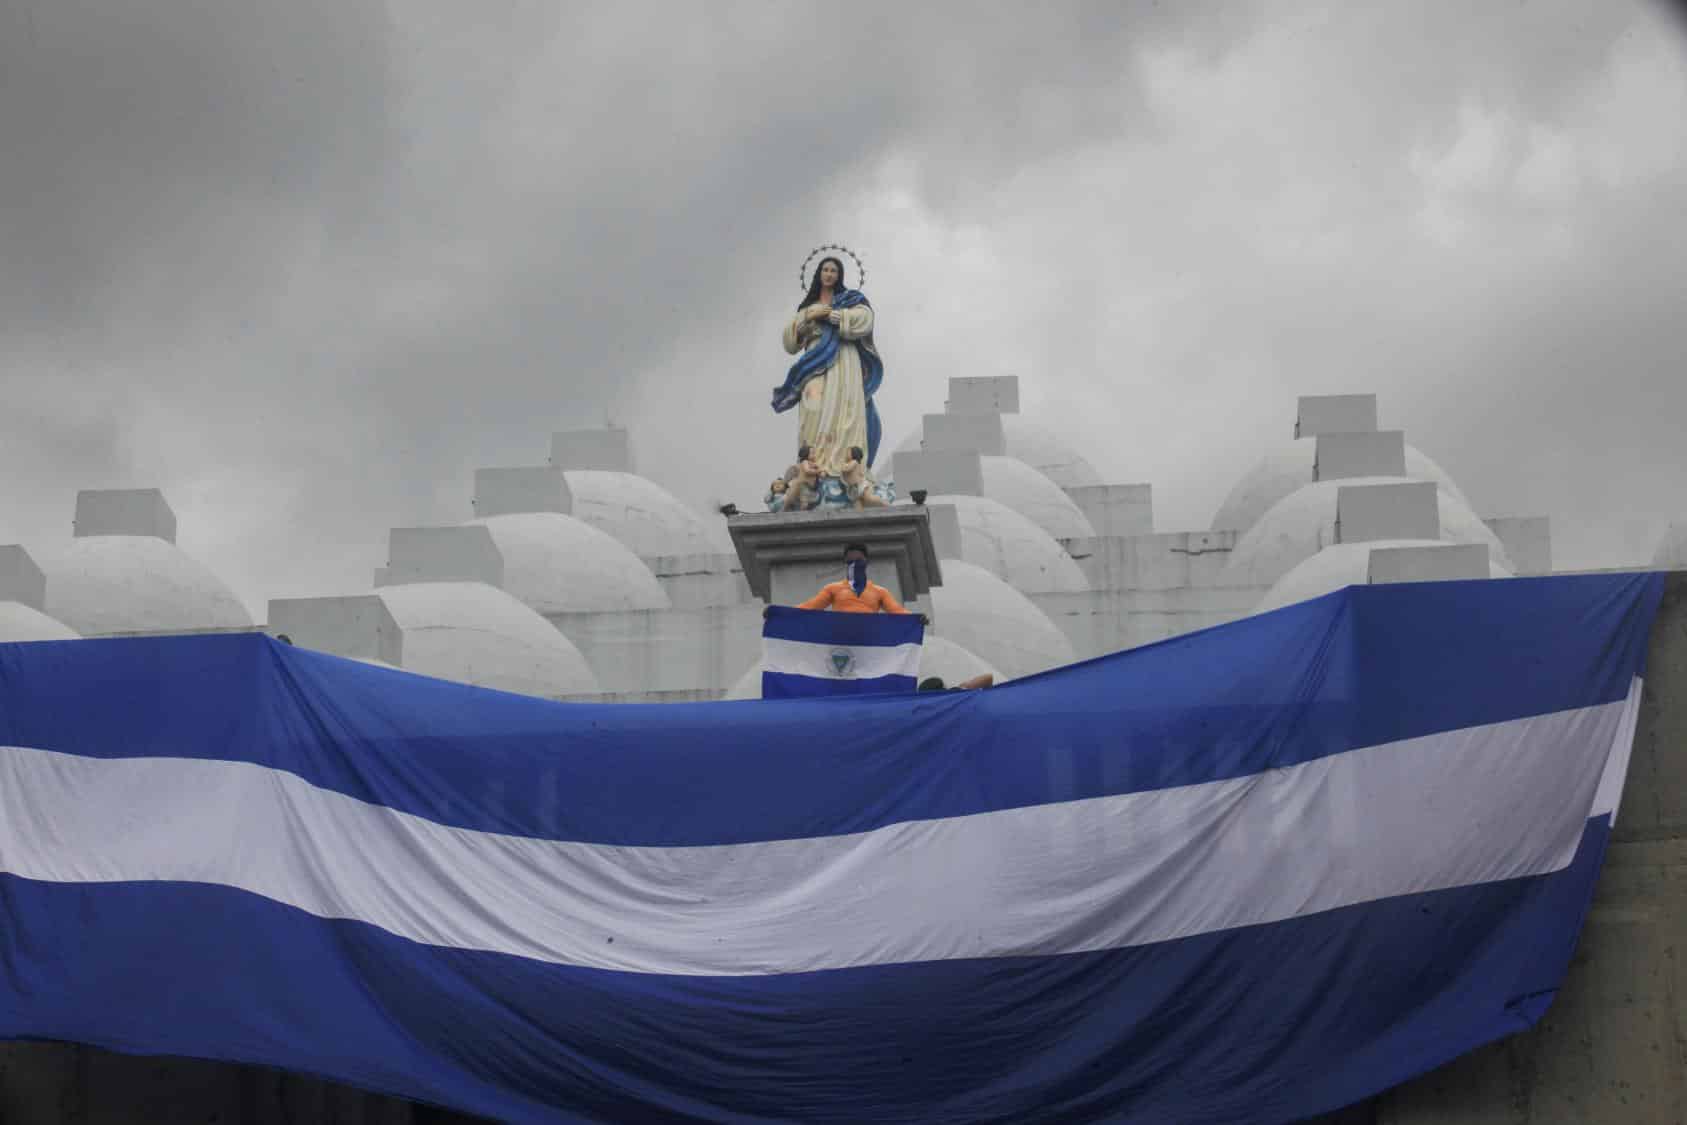 Giant Nicaraguan flag waving below the figure of a saint and a person holding a small Nicaraguan flag. File photo.